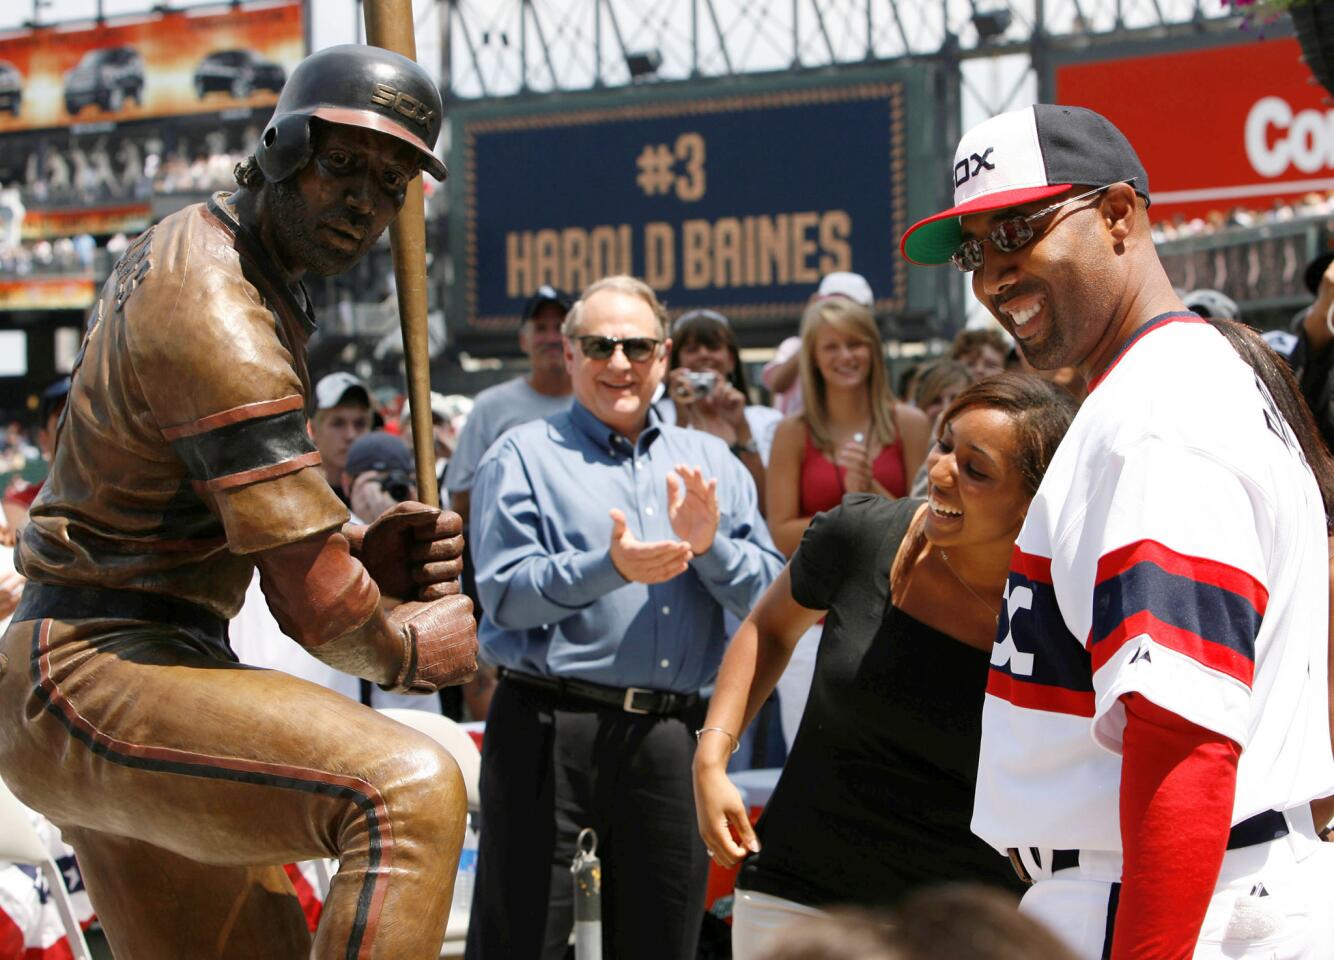 Harold Baines looks at his bronze statue with his daughter, Courtney, at U.S. Cellular Field on July 20, 2008. Jerry Reinsdorf, owner of the Chicago White Sox, claps in the background.